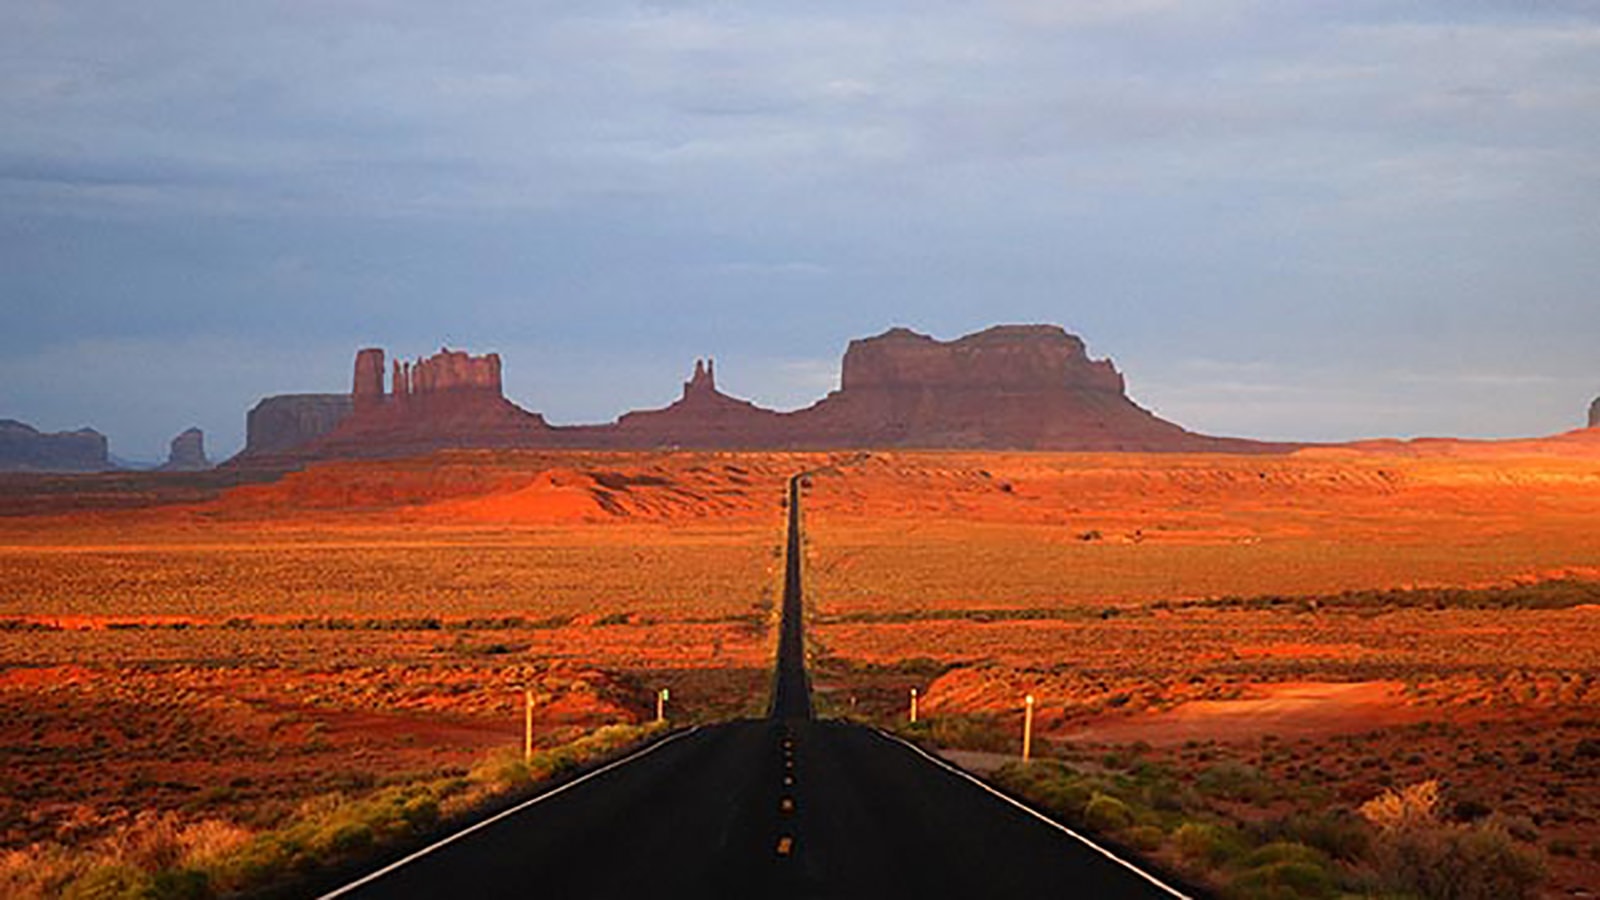 delta has landed canyonland jeep rentals on moab car rental airport